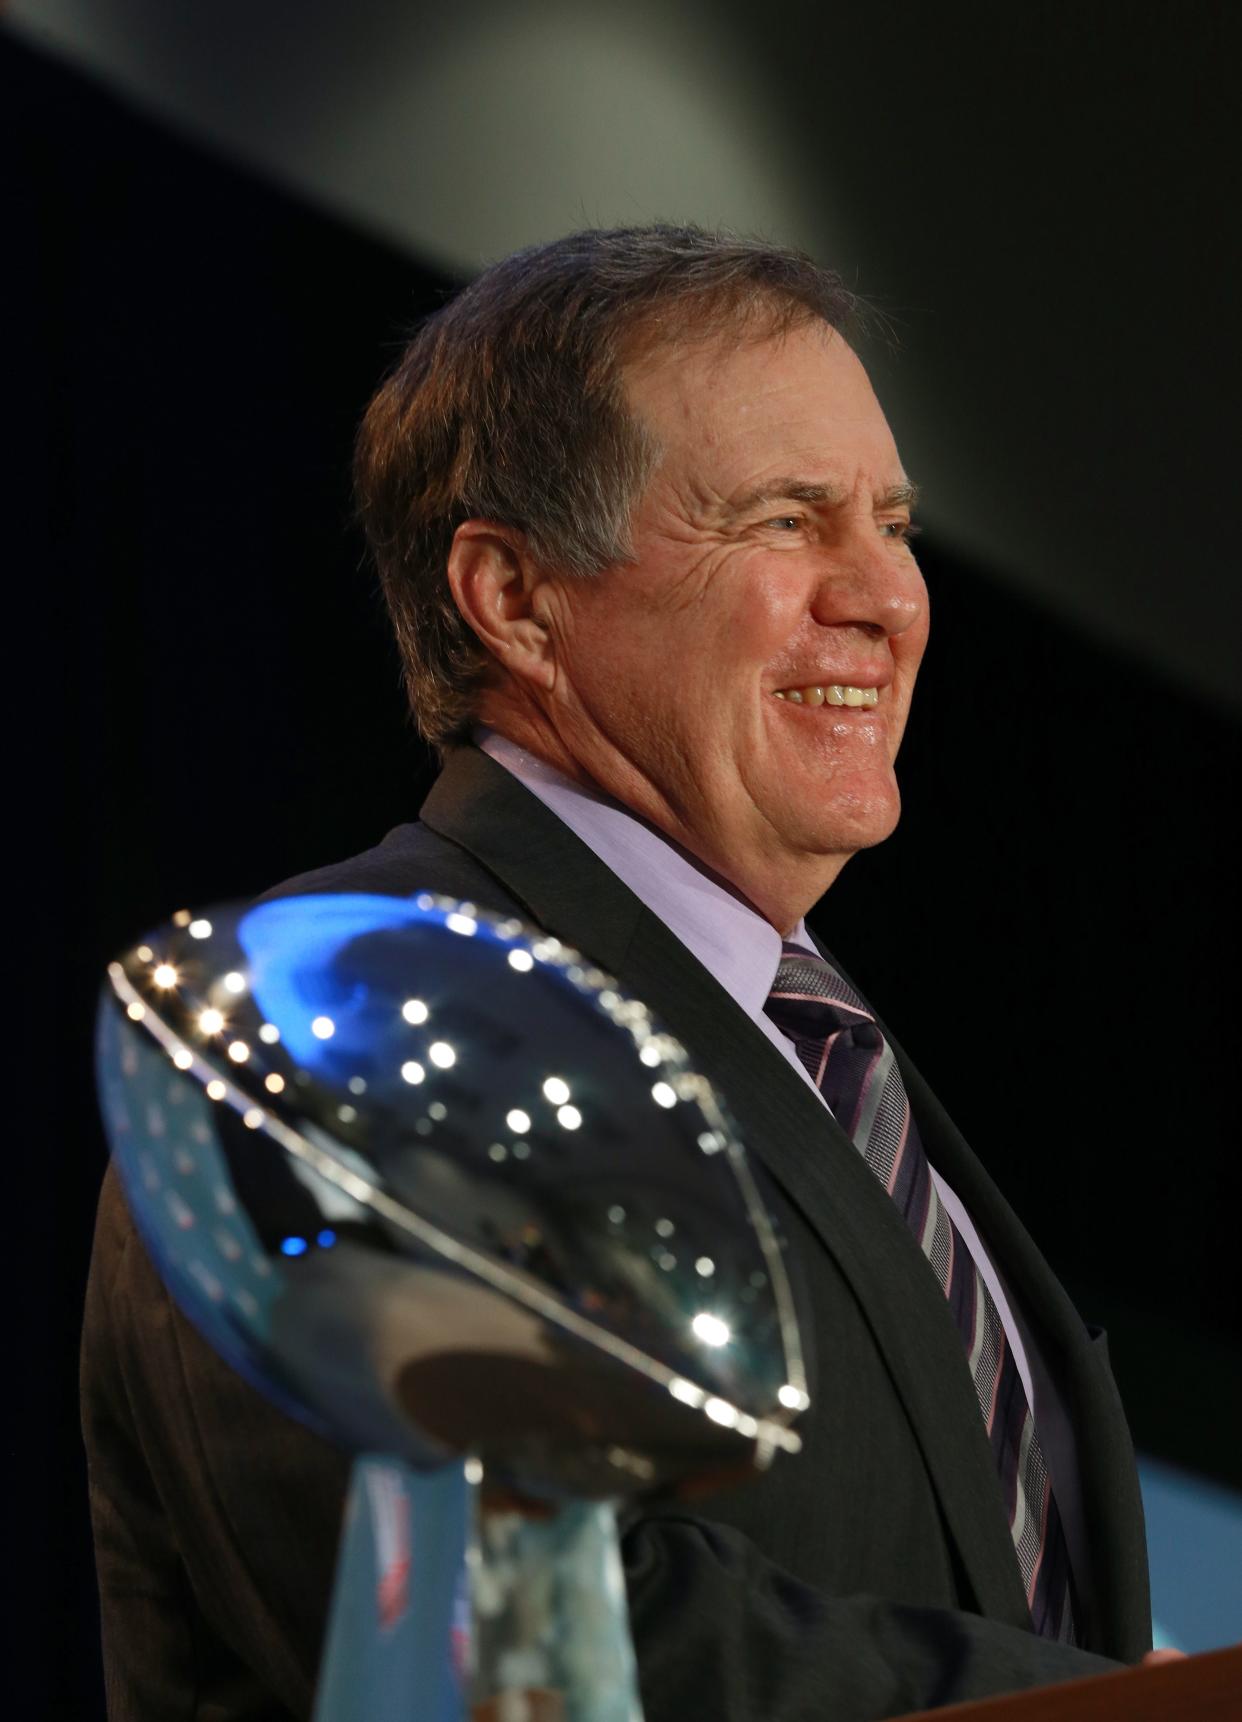 Then-Patriots coach Bill Belichick with the Vince Lombardi Trophy after winning Super Bowl LI in Houston in 2017.